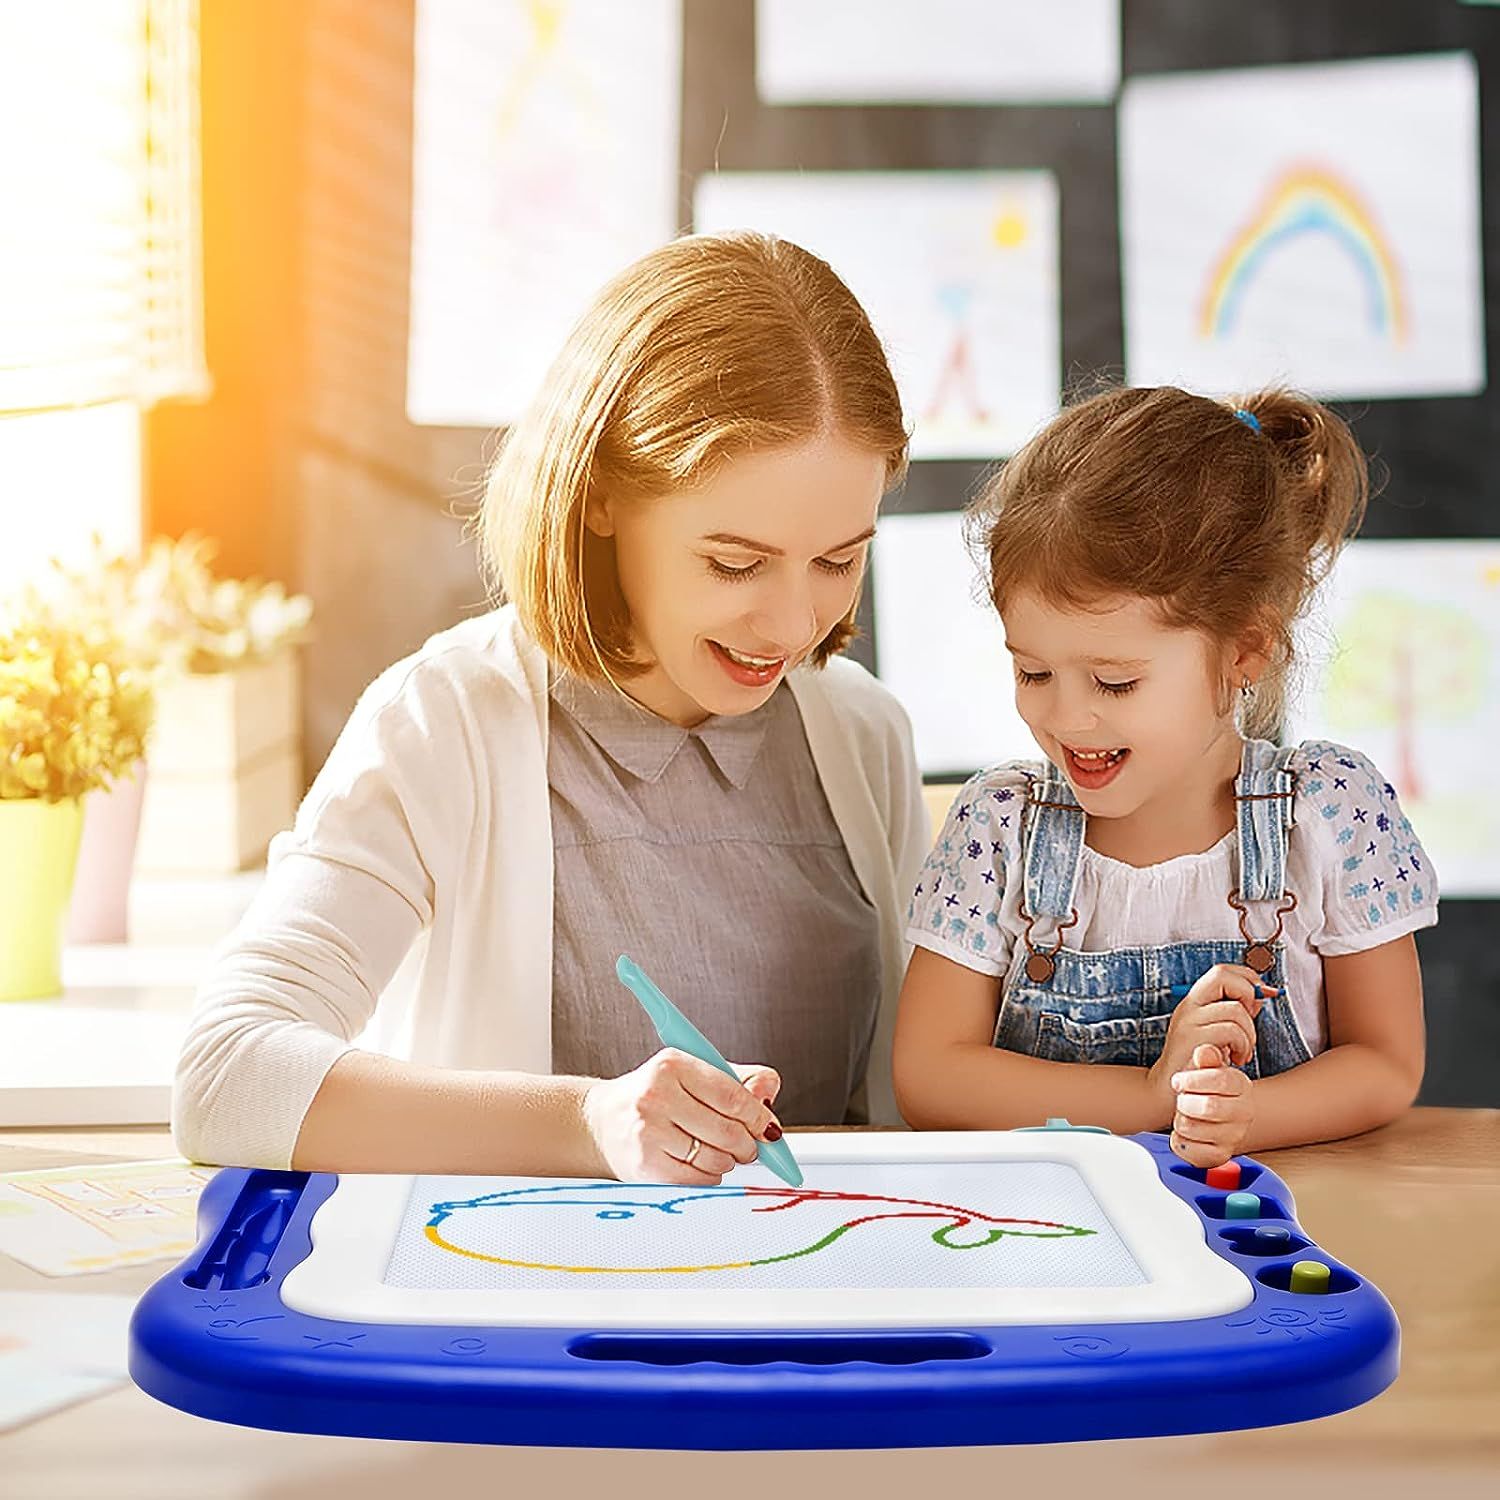  SGILE Magnetic Drawing Board Toy for Kids, Large